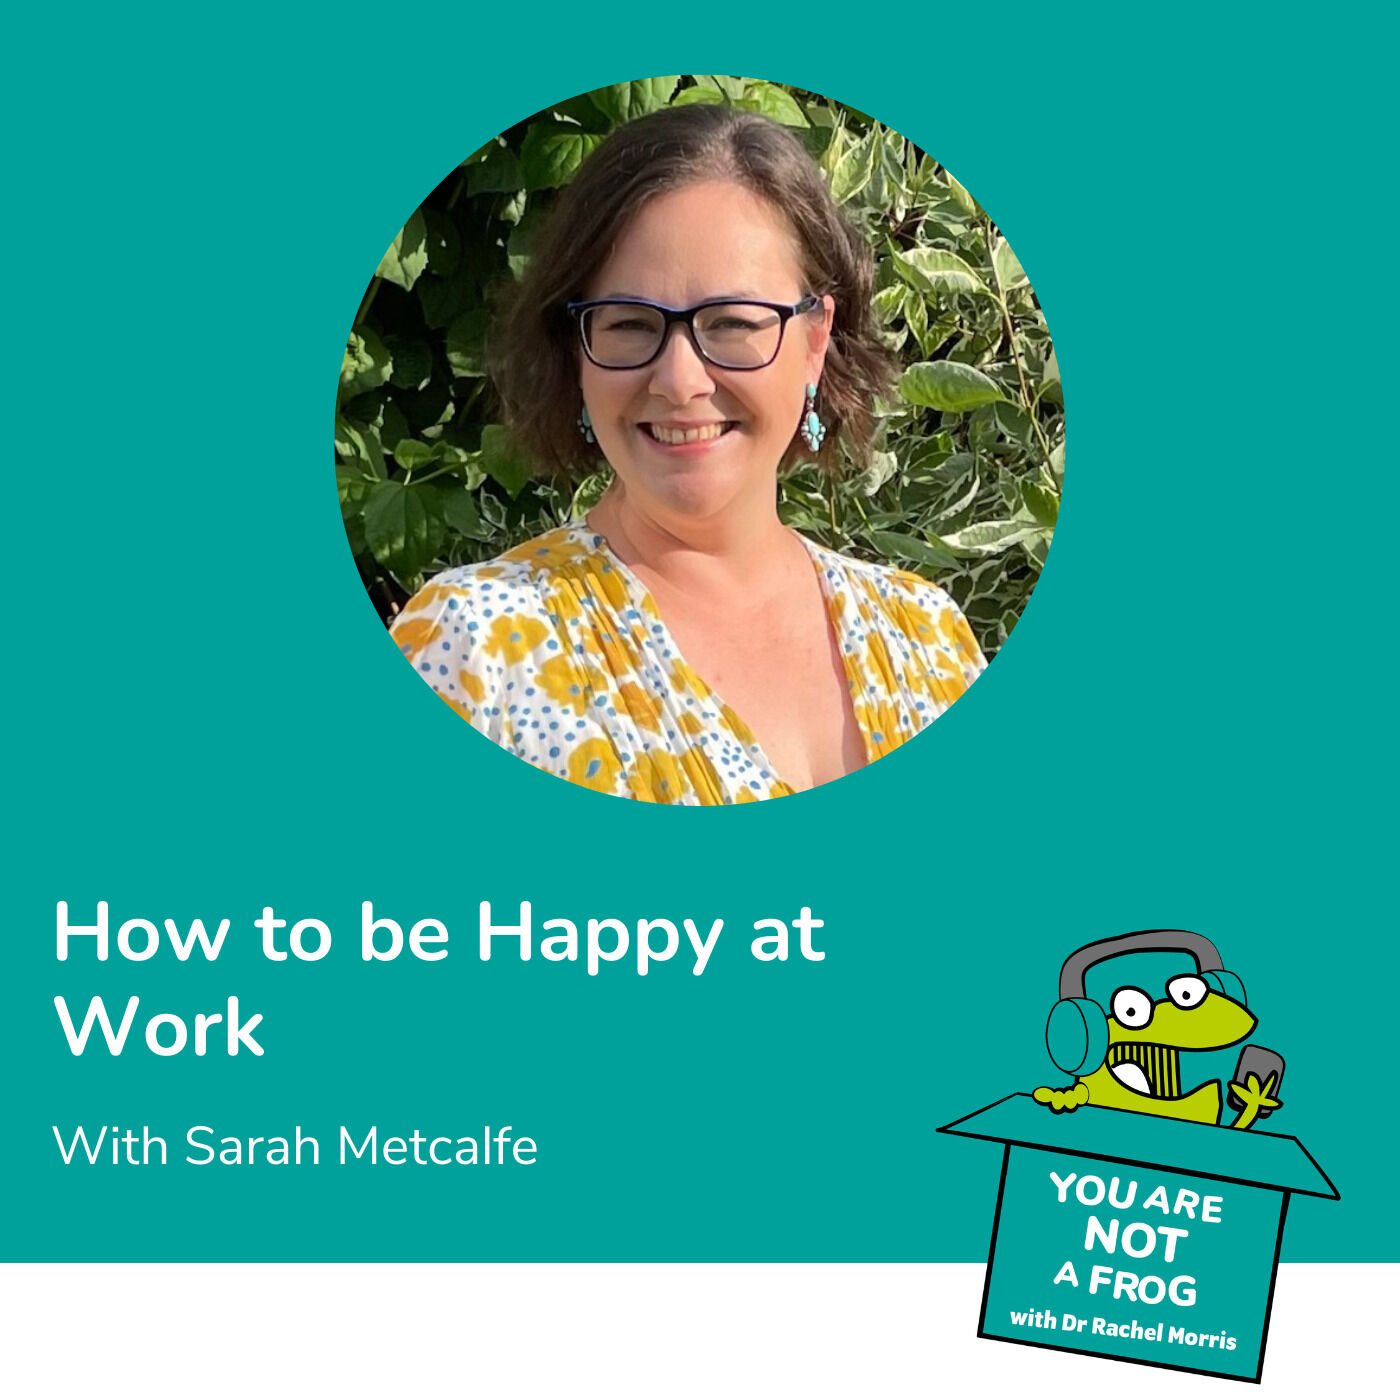 How to Be Happy at Work with Sarah Metcalfe